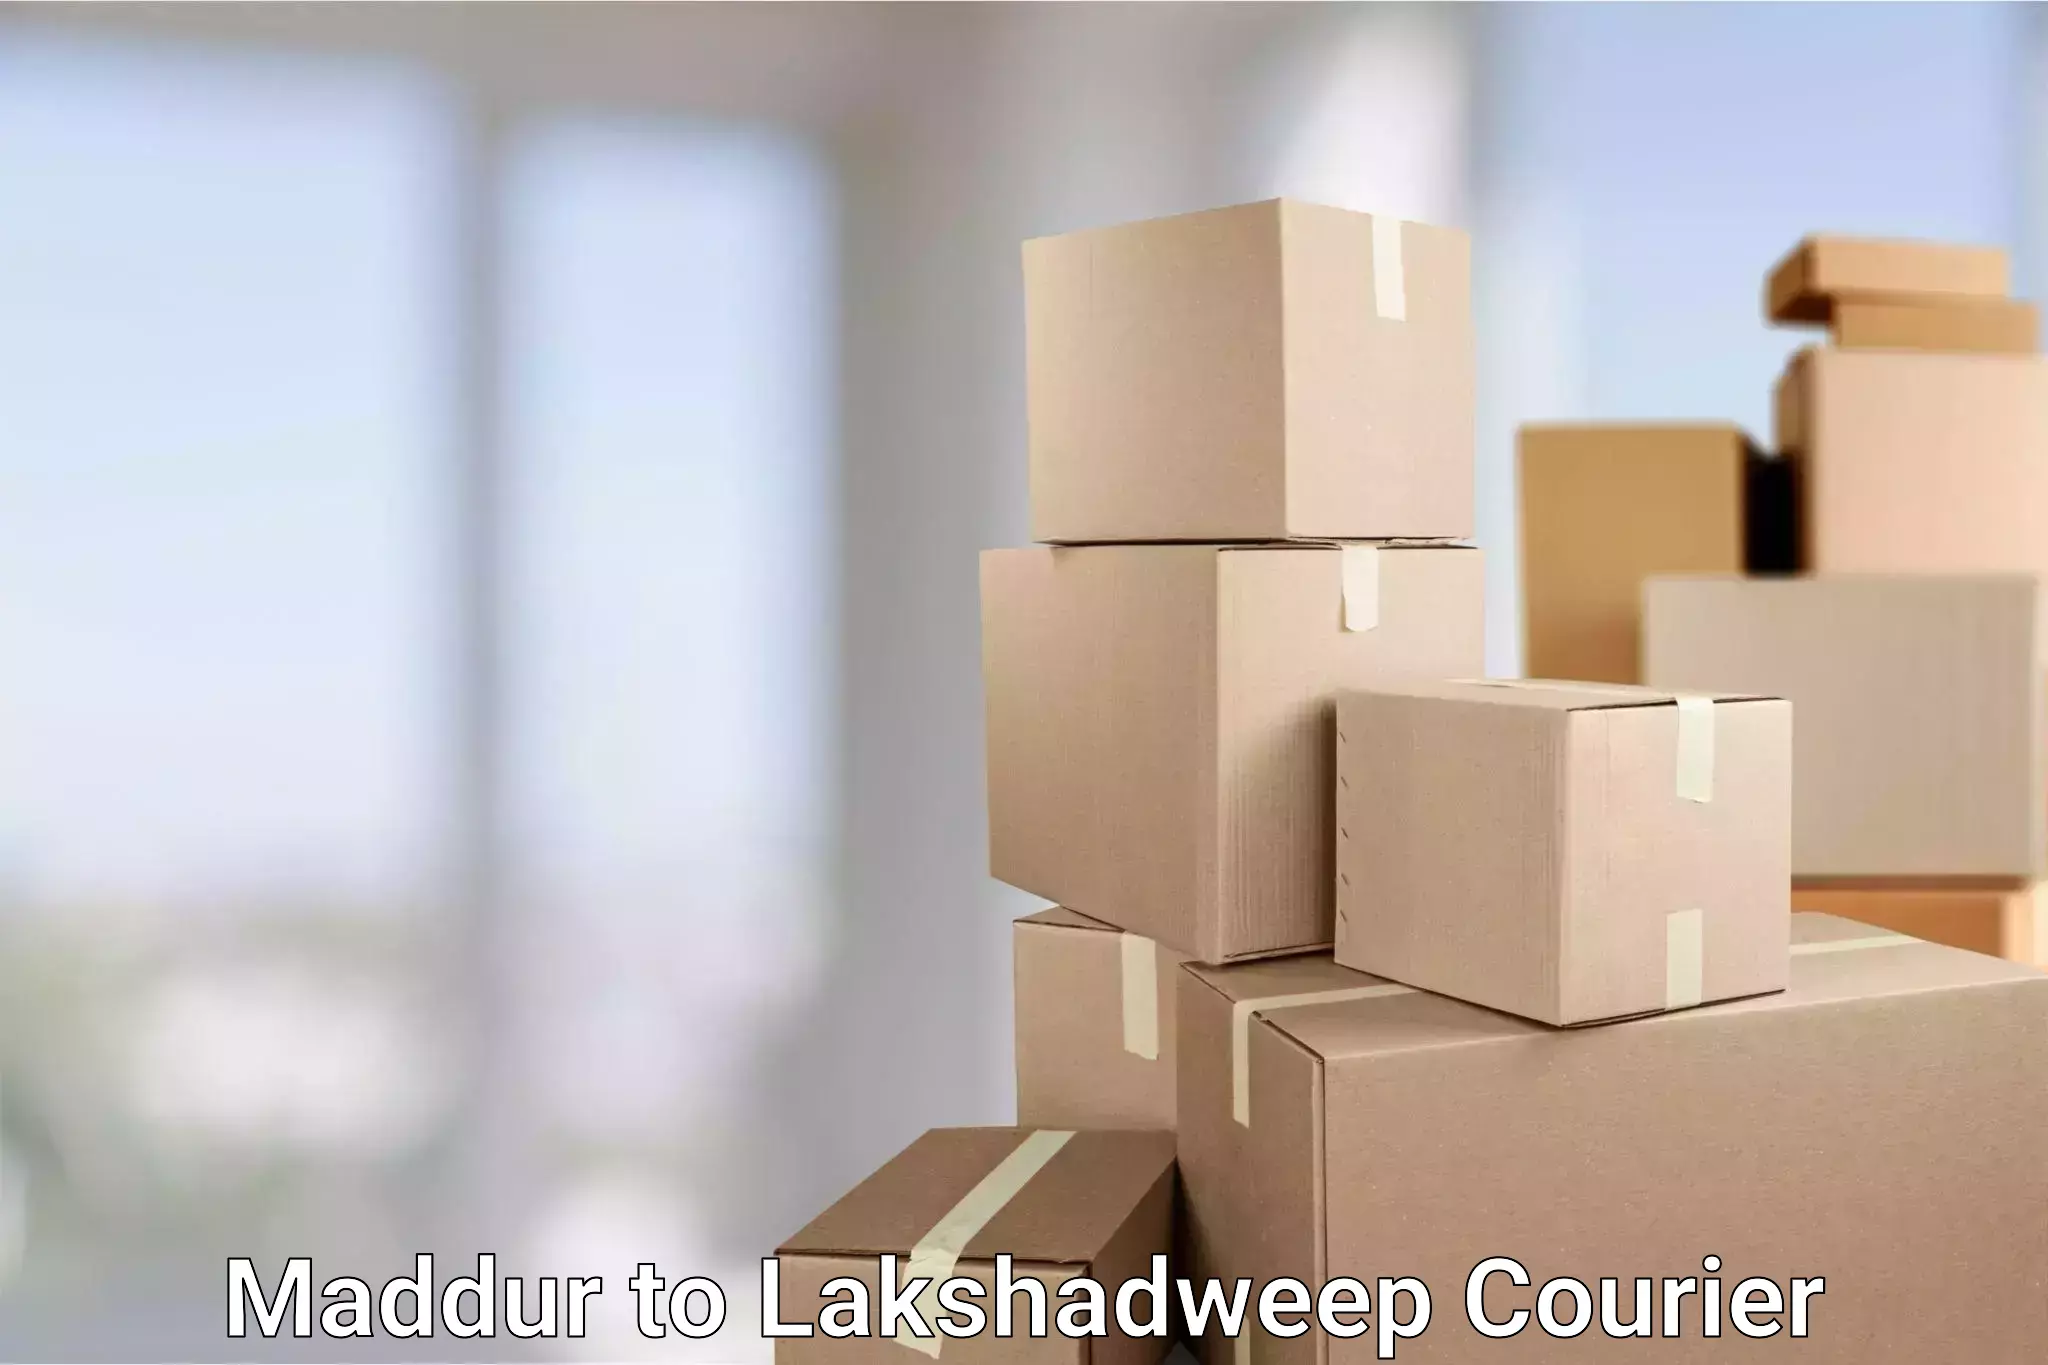 Trackable shipping service Maddur to Lakshadweep